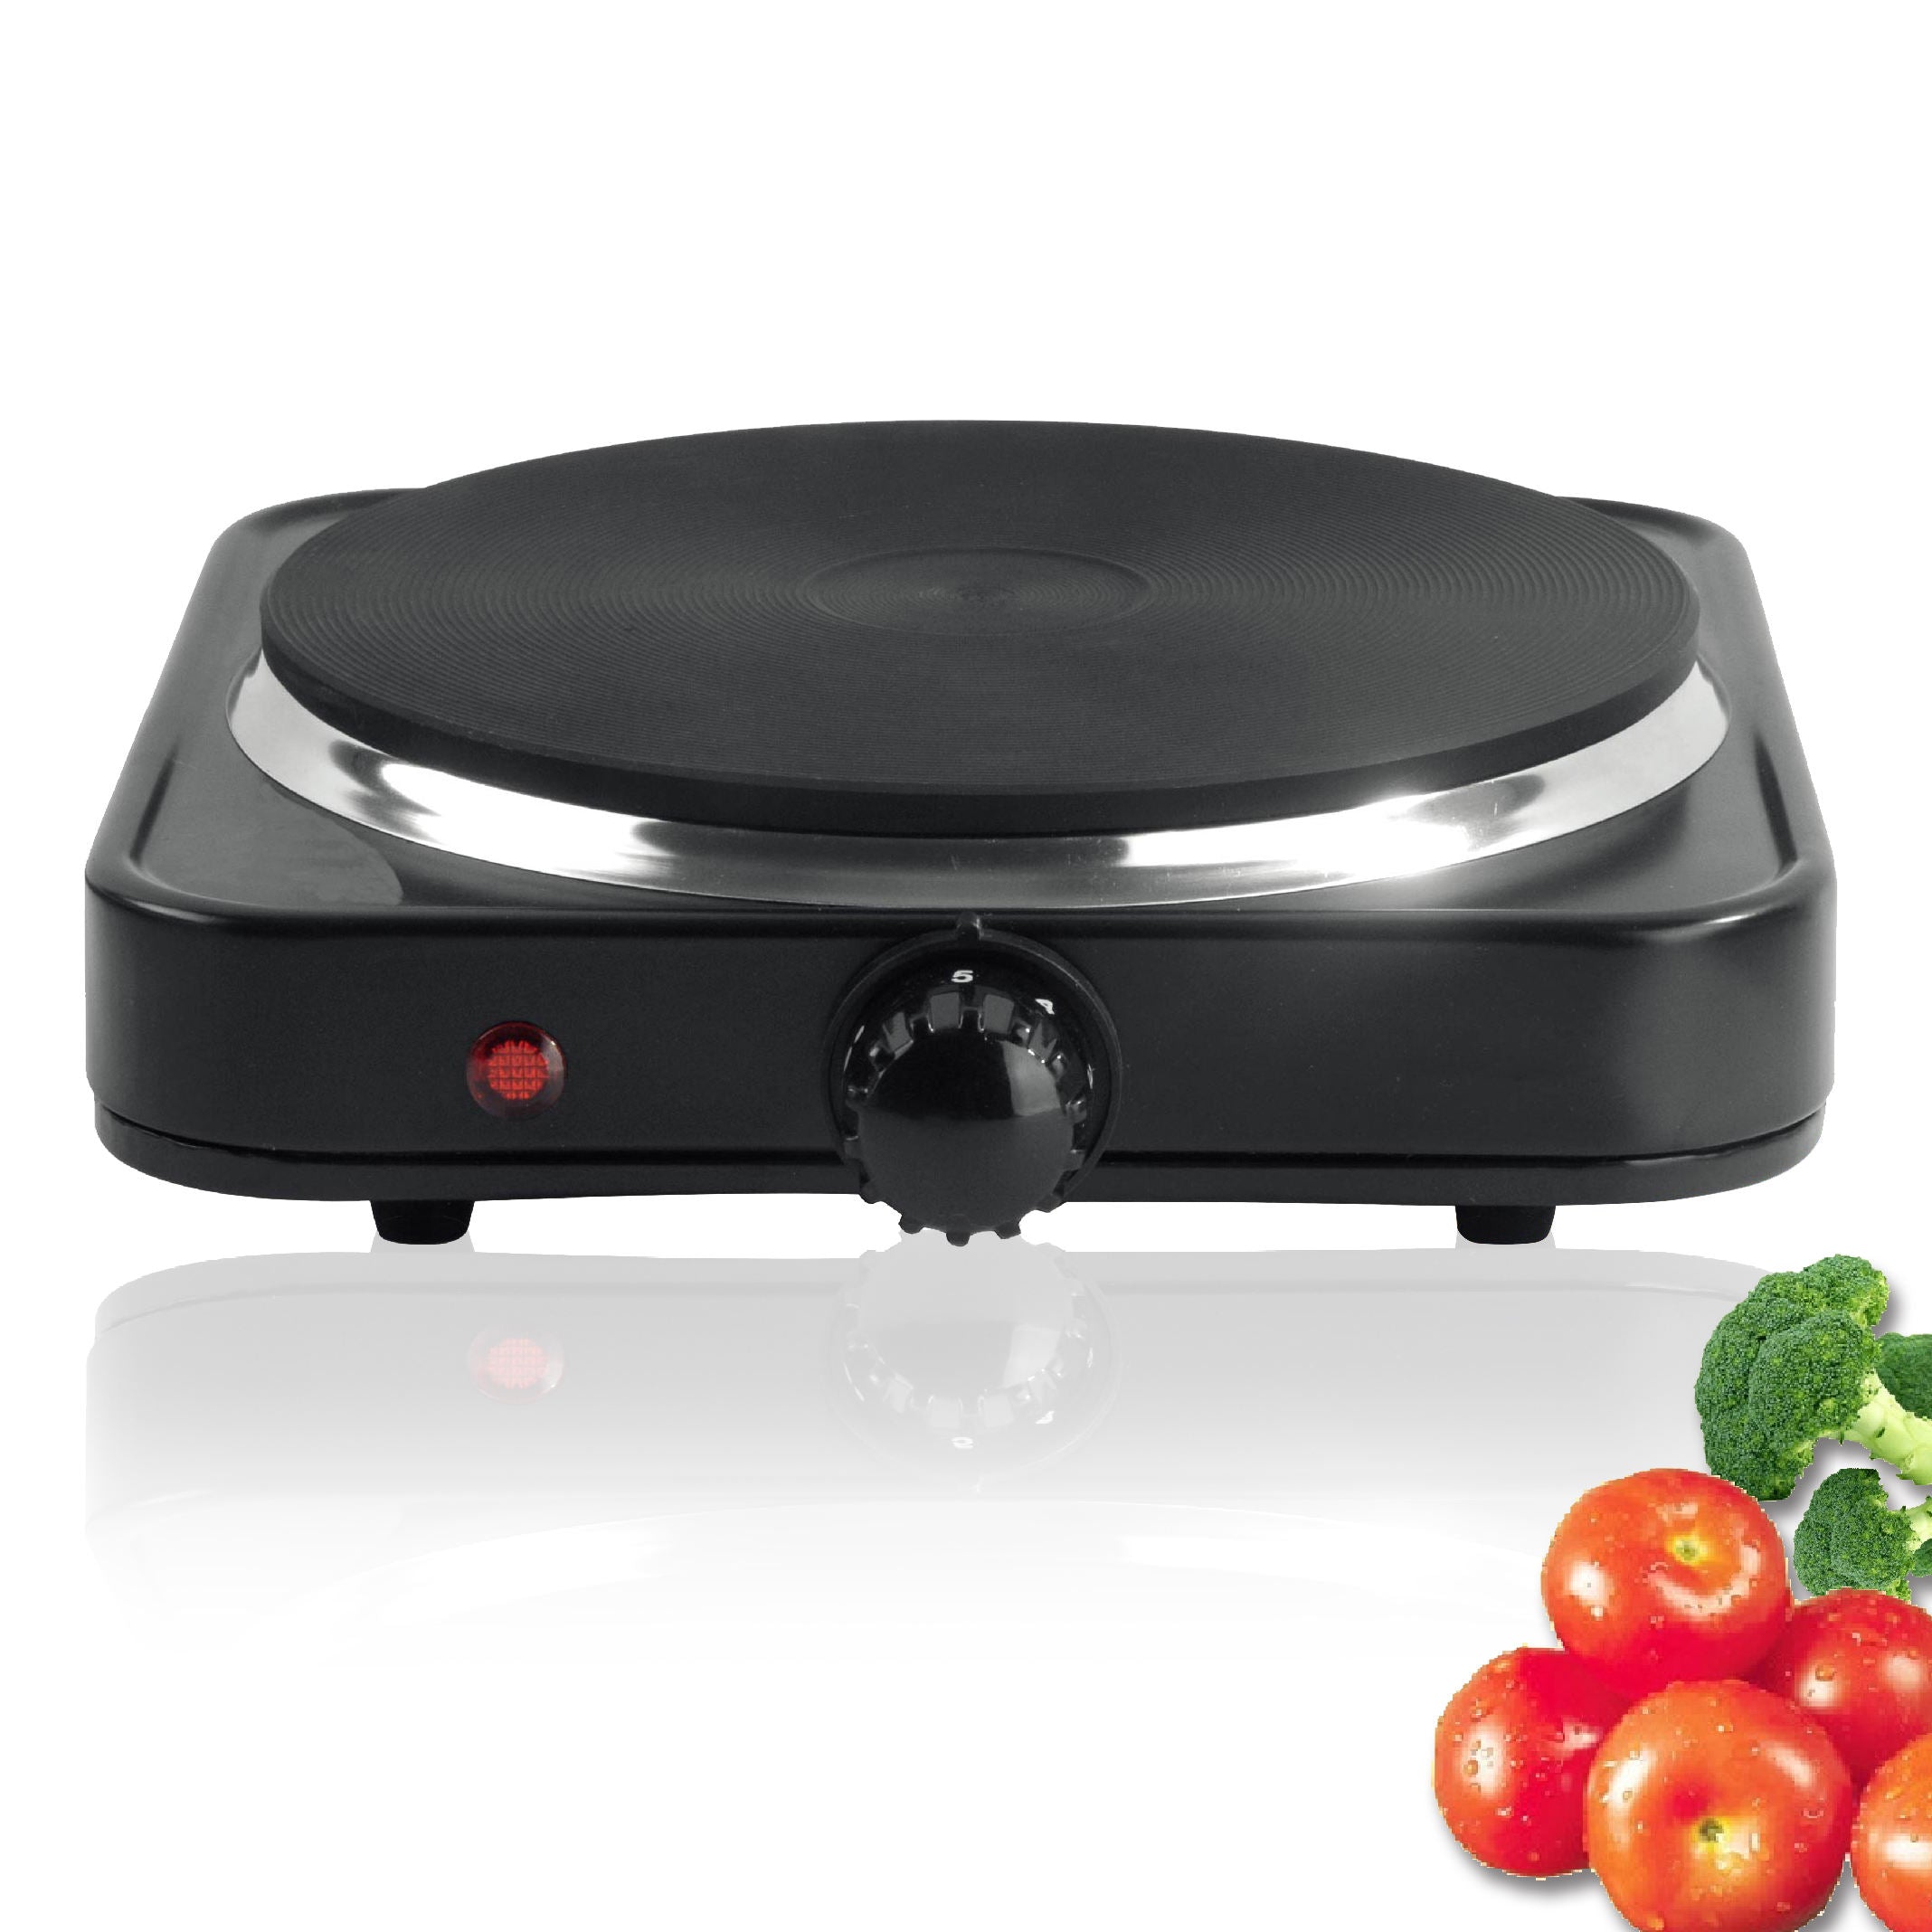 Osaka Hot Plate Electric Cooking Cooker